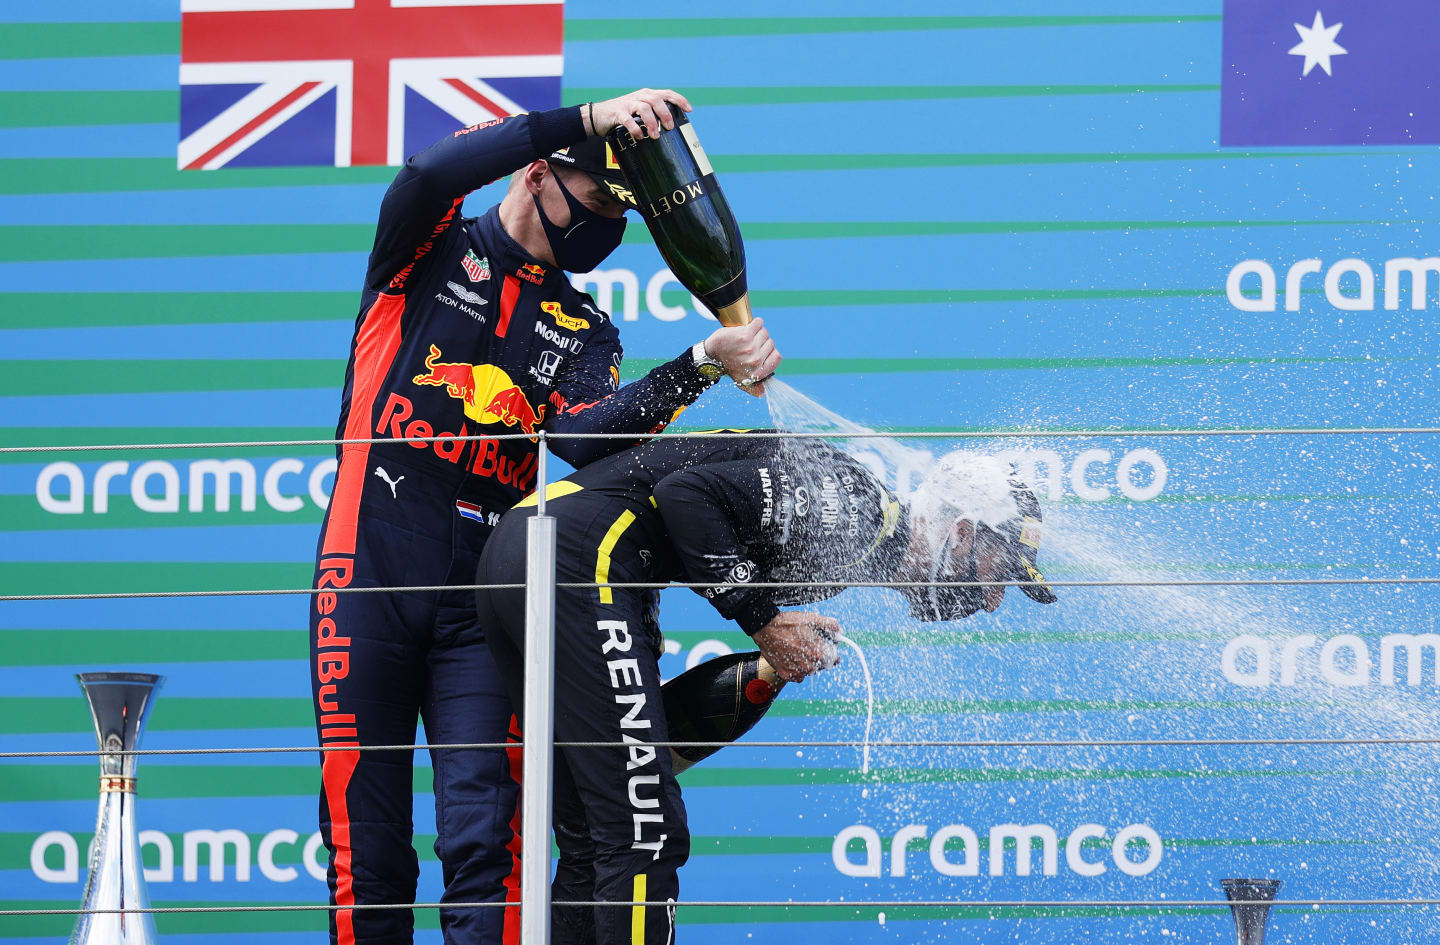 NUERBURG, GERMANY - OCTOBER 11: Race winner Lewis Hamilton of Great Britain and Mercedes GP and second placed Max Verstappen of Netherlands and Red Bull Racing celebrate on the podium during the F1 Eifel Grand Prix at Nuerburgring on October 11, 2020 in Nuerburg, Germany. (Photo by Ronald Wittek - Pool/Getty Images)